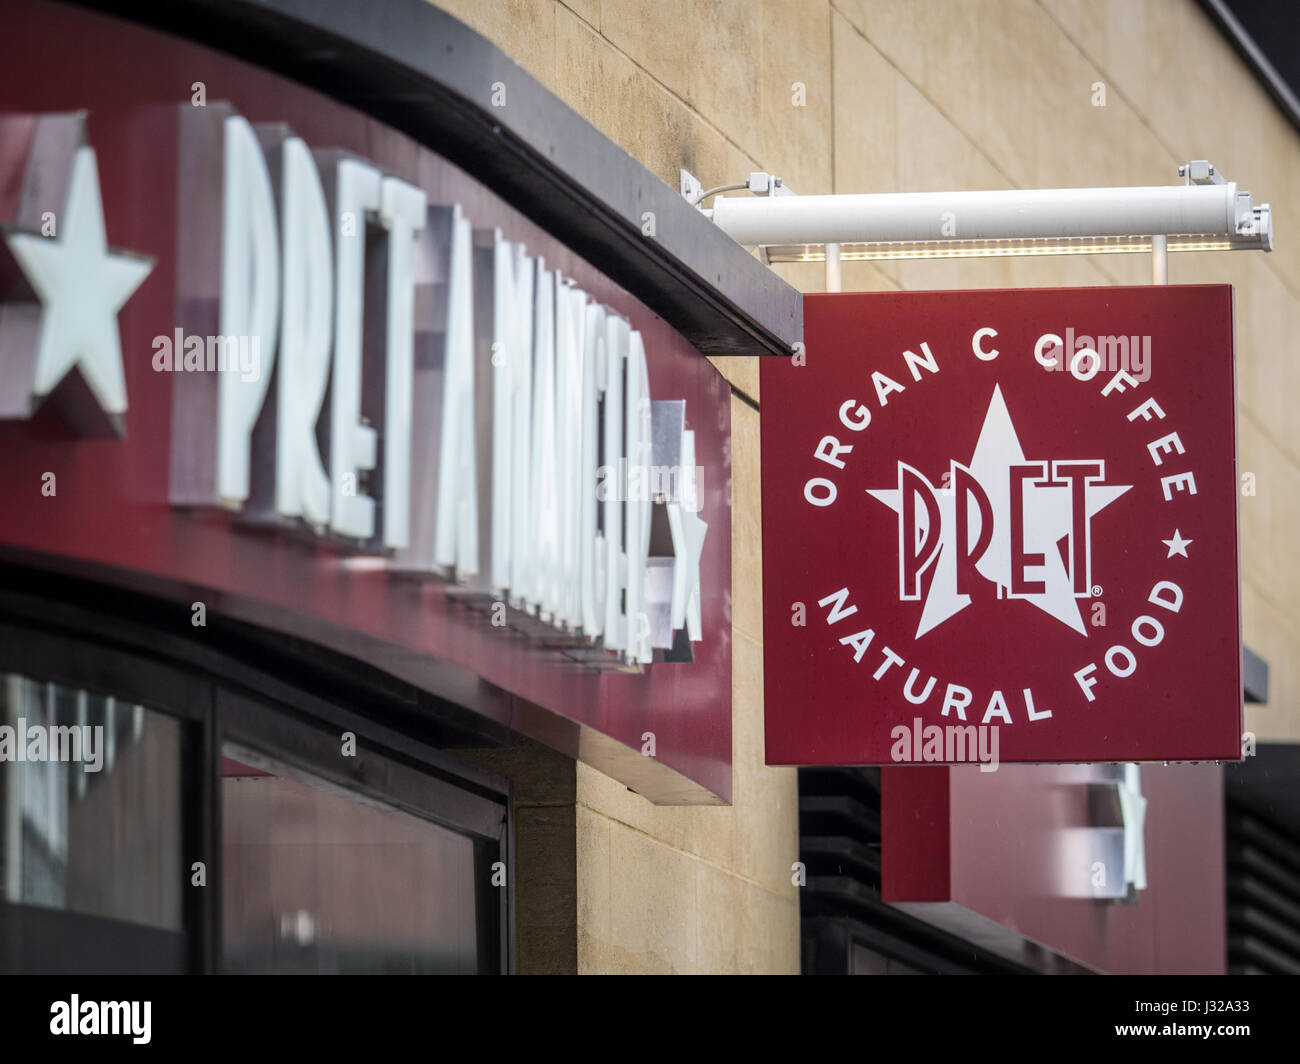 A Pret a Manger chain cafe restaurant in London's Square Mile financial district. Stock Photo